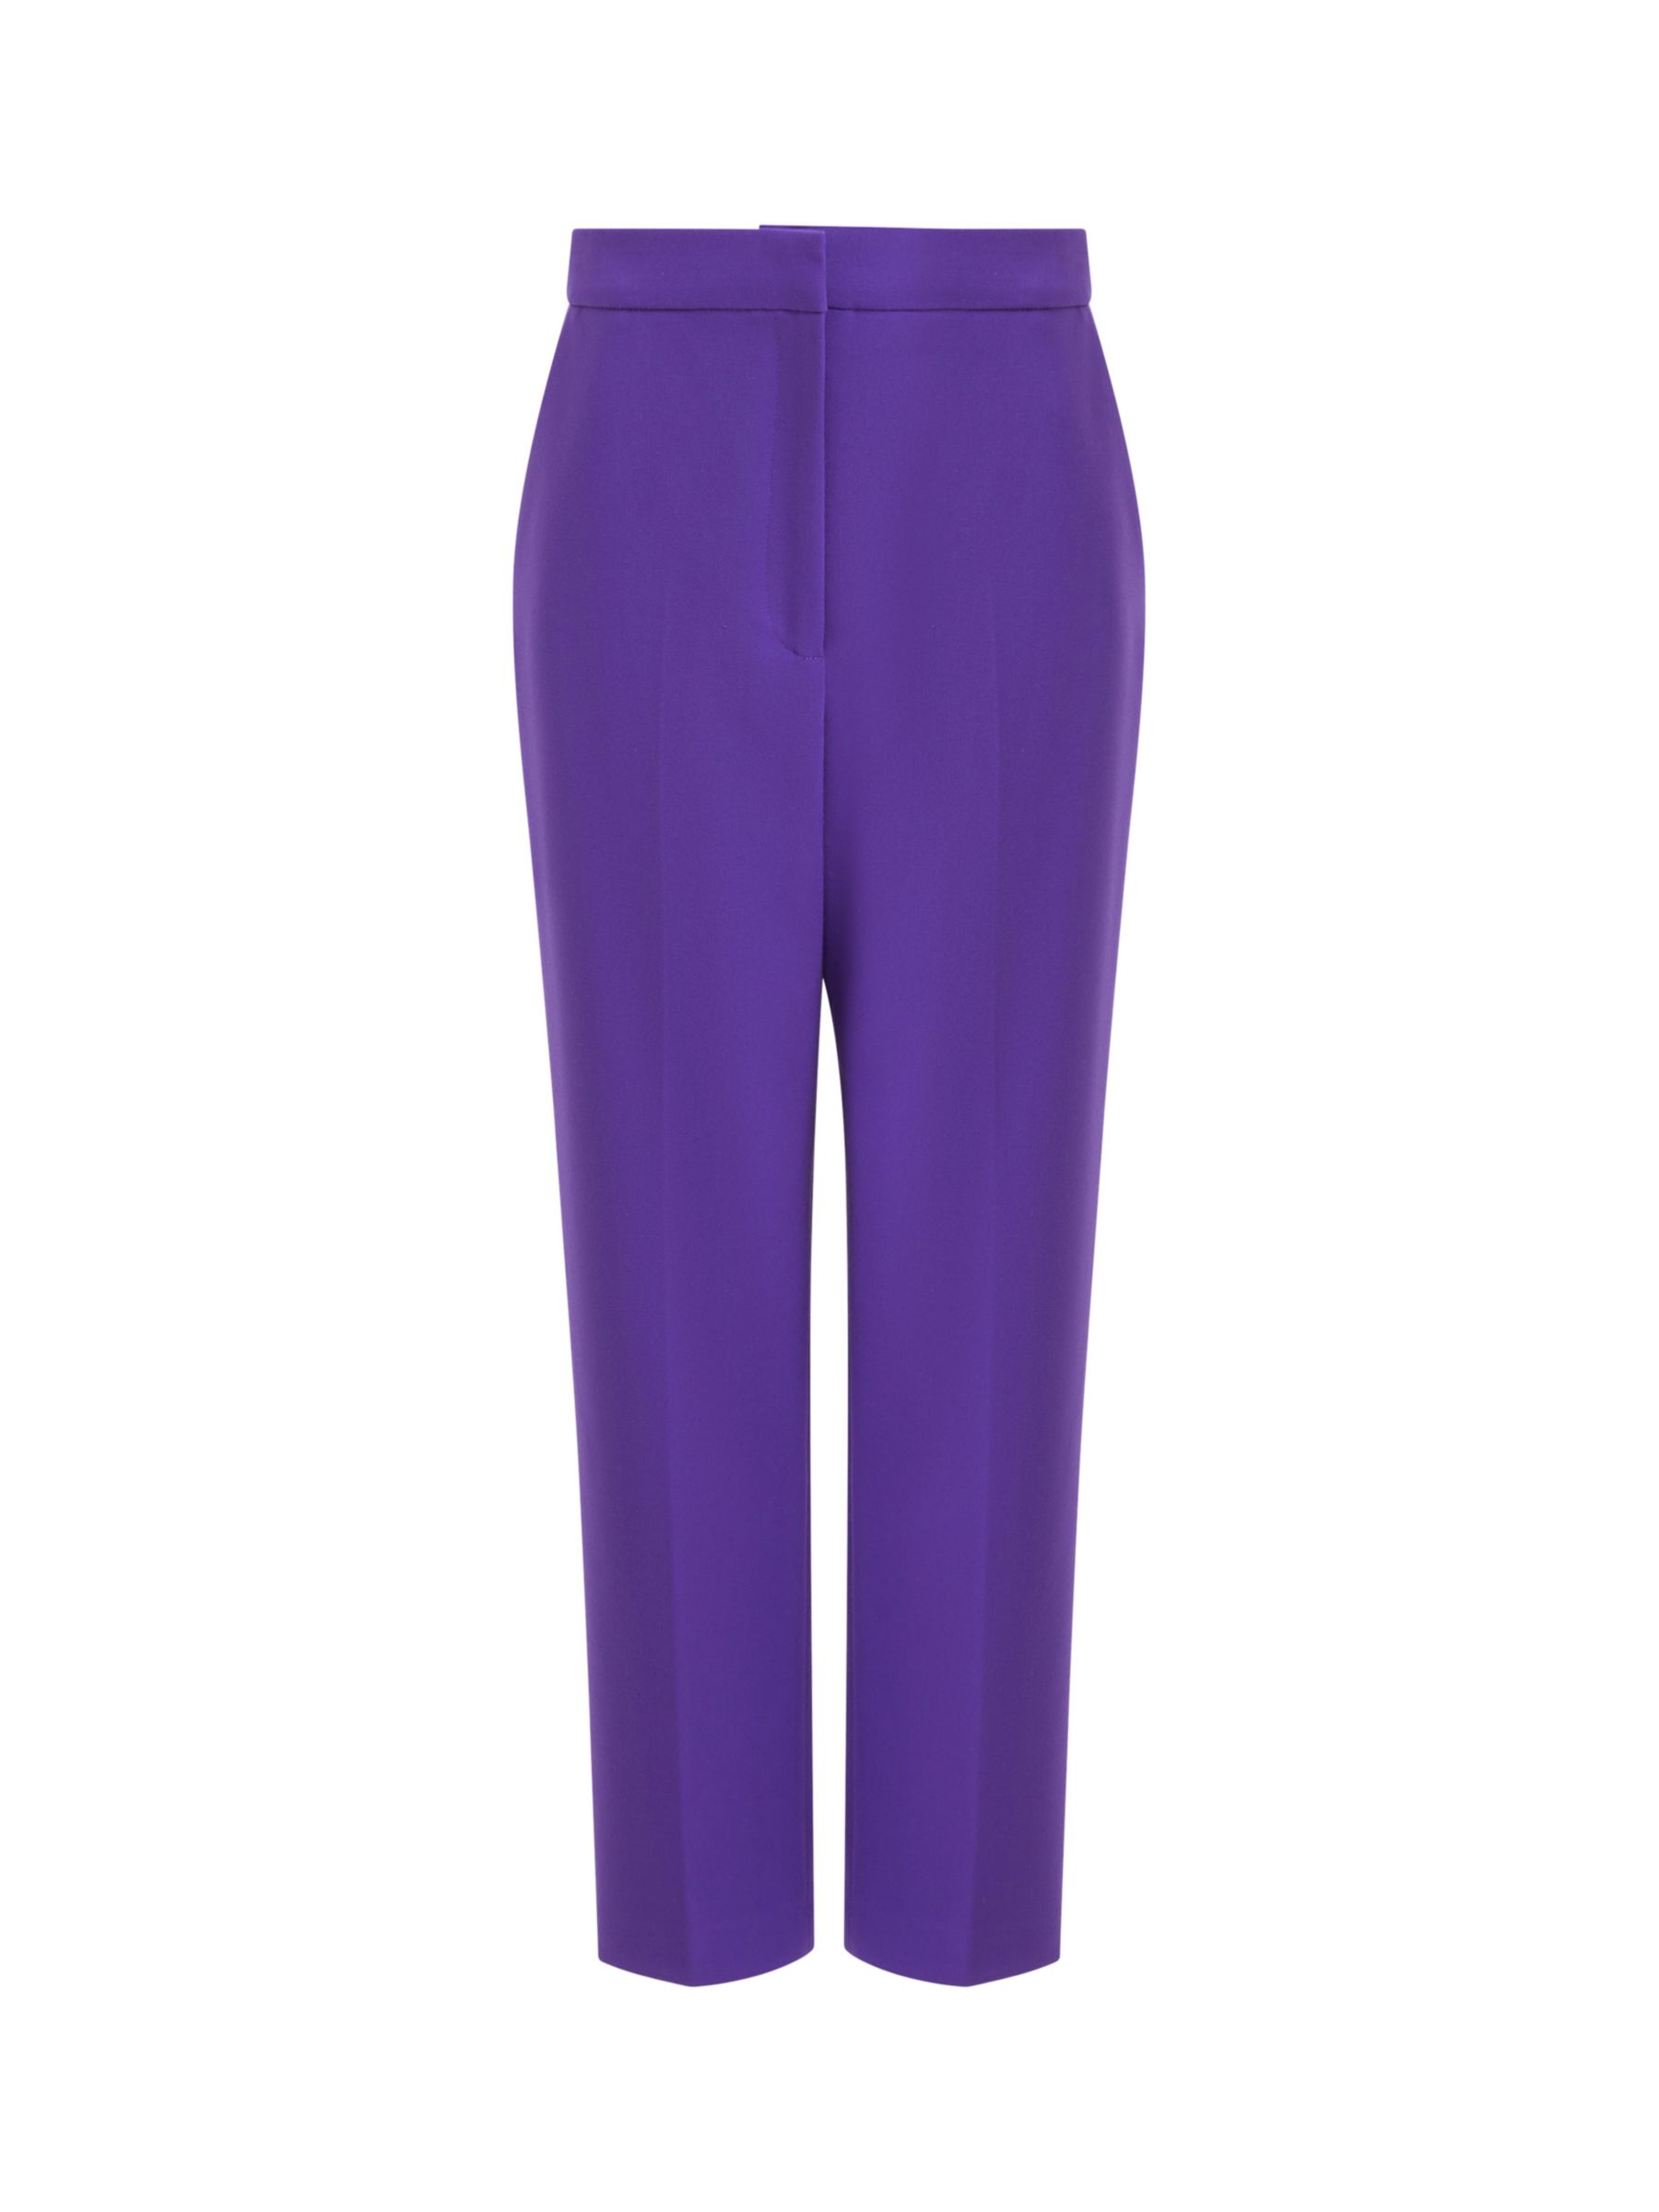 French Connection Whisper Trousers, Cobalt Violet at John Lewis & Partners